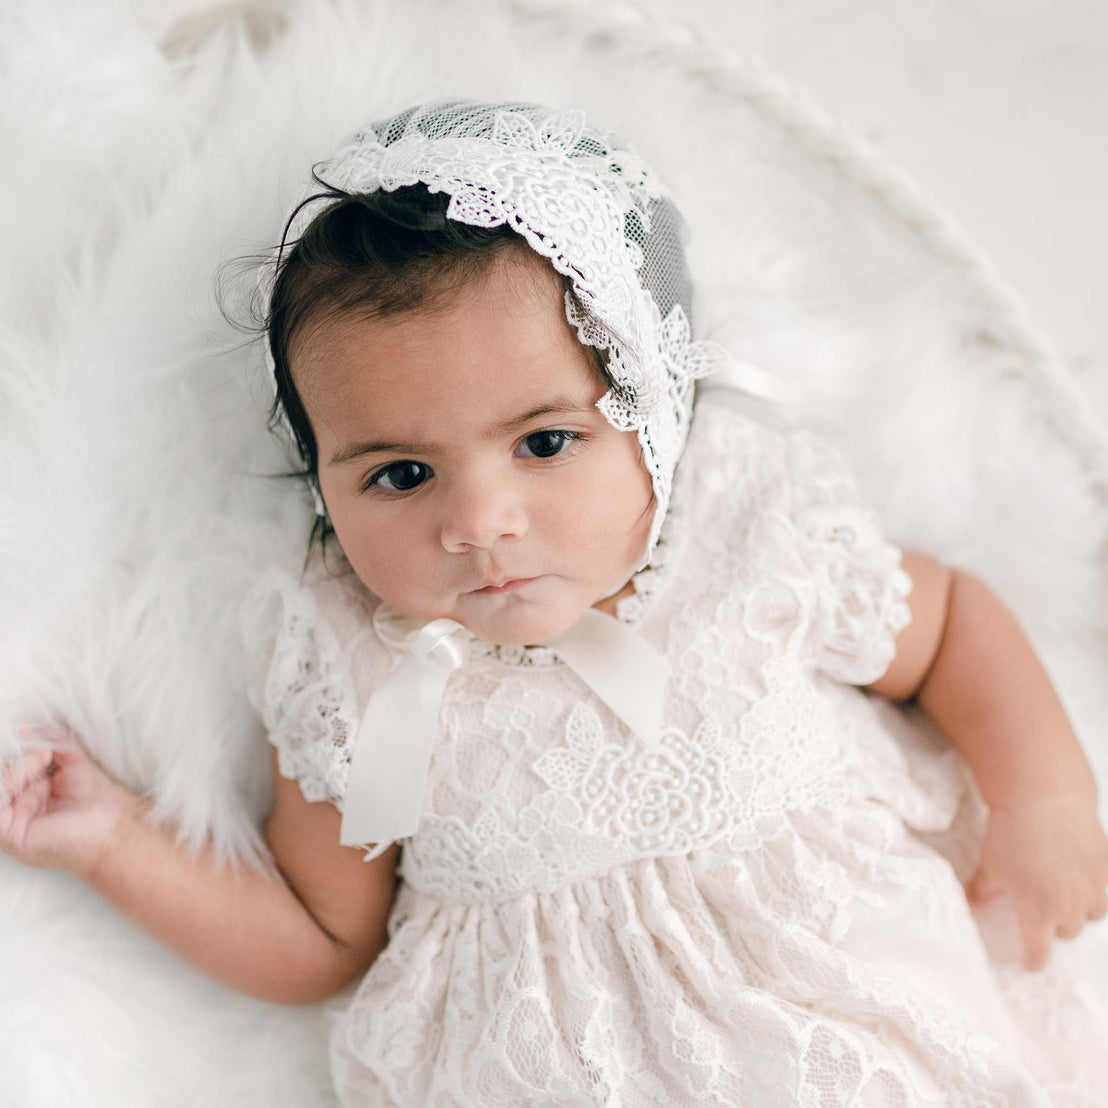 A baby with a thoughtful expression, wearing a vintage, handcrafted white lace dress and a Juliette Lace Bonnet, lies on a fluffy white blanket.